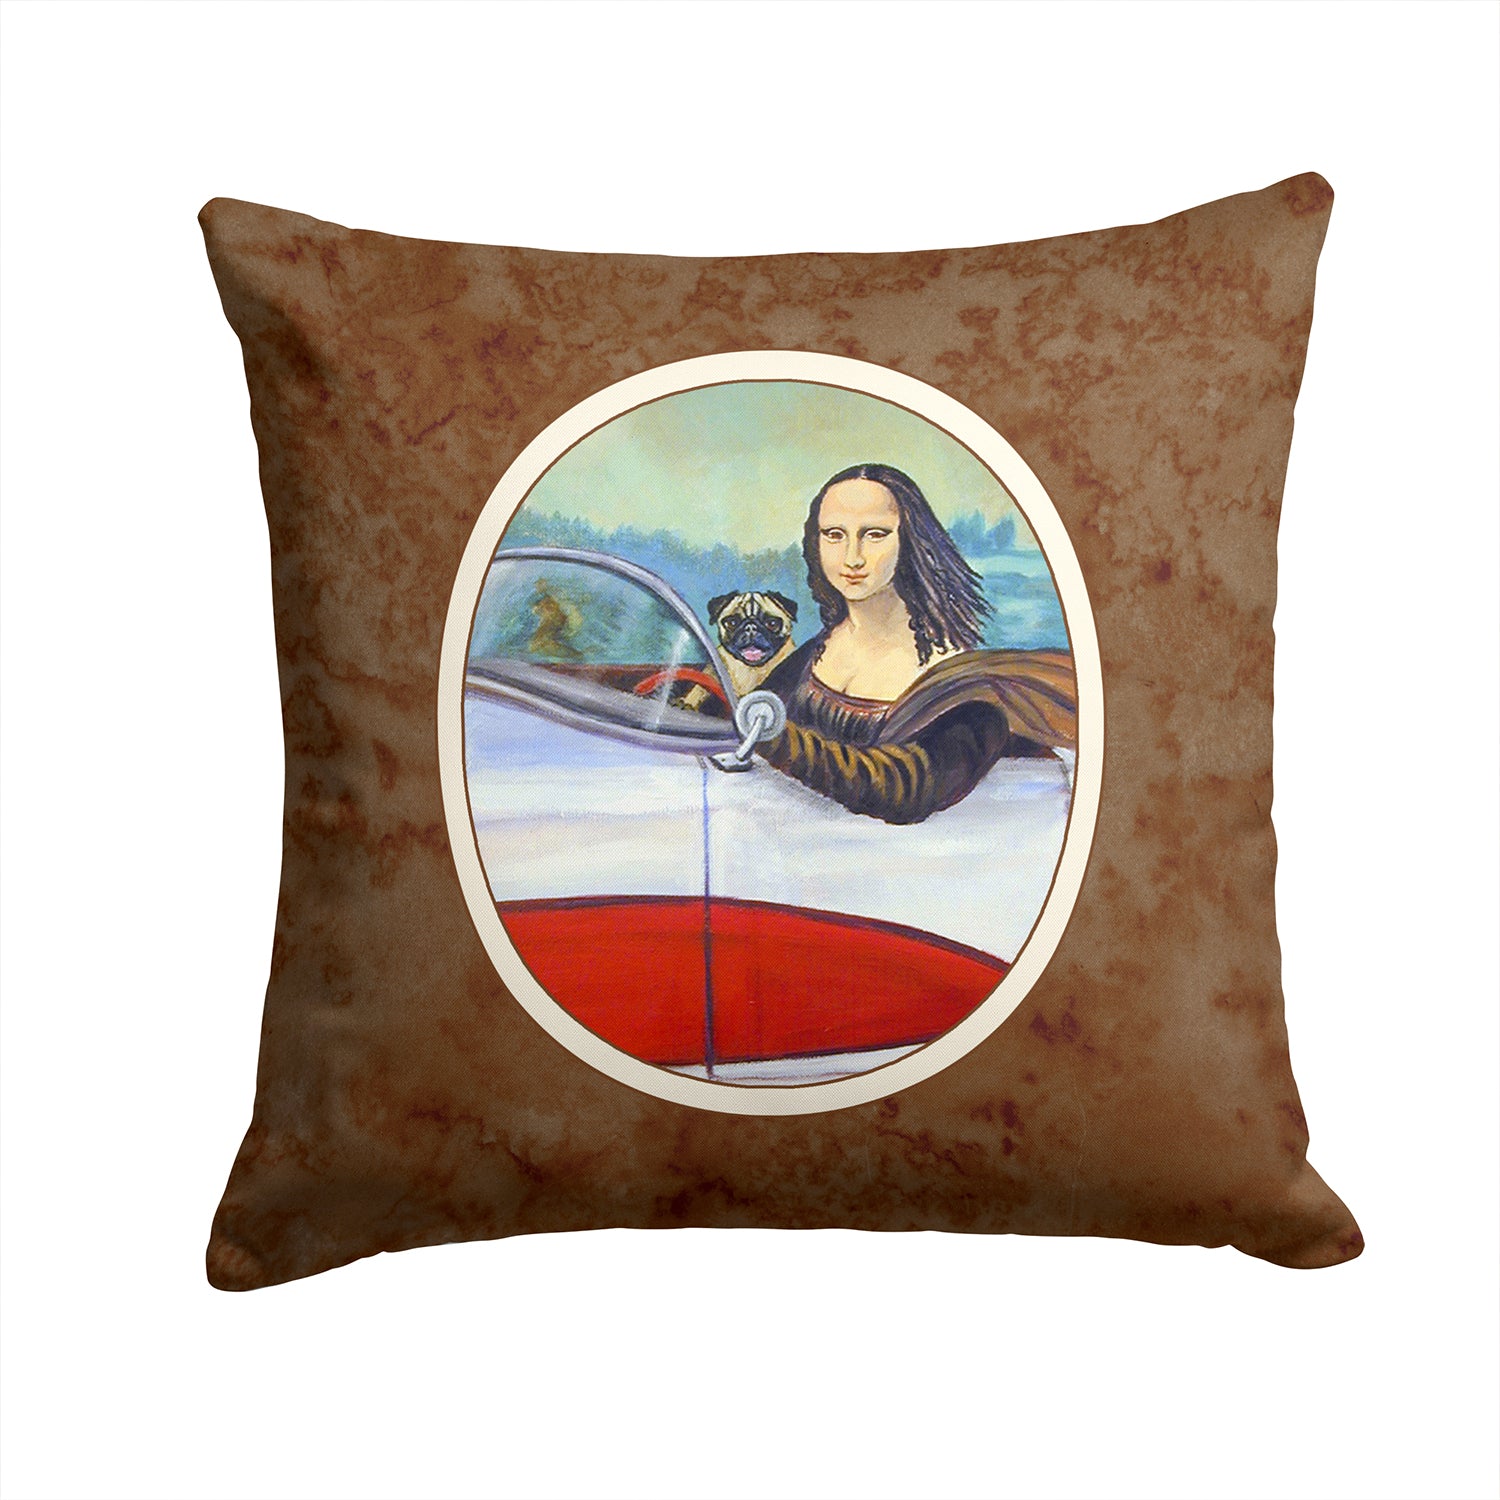 Fawn Pug and Mona Lisa Fabric Decorative Pillow 7043PW1414 - the-store.com